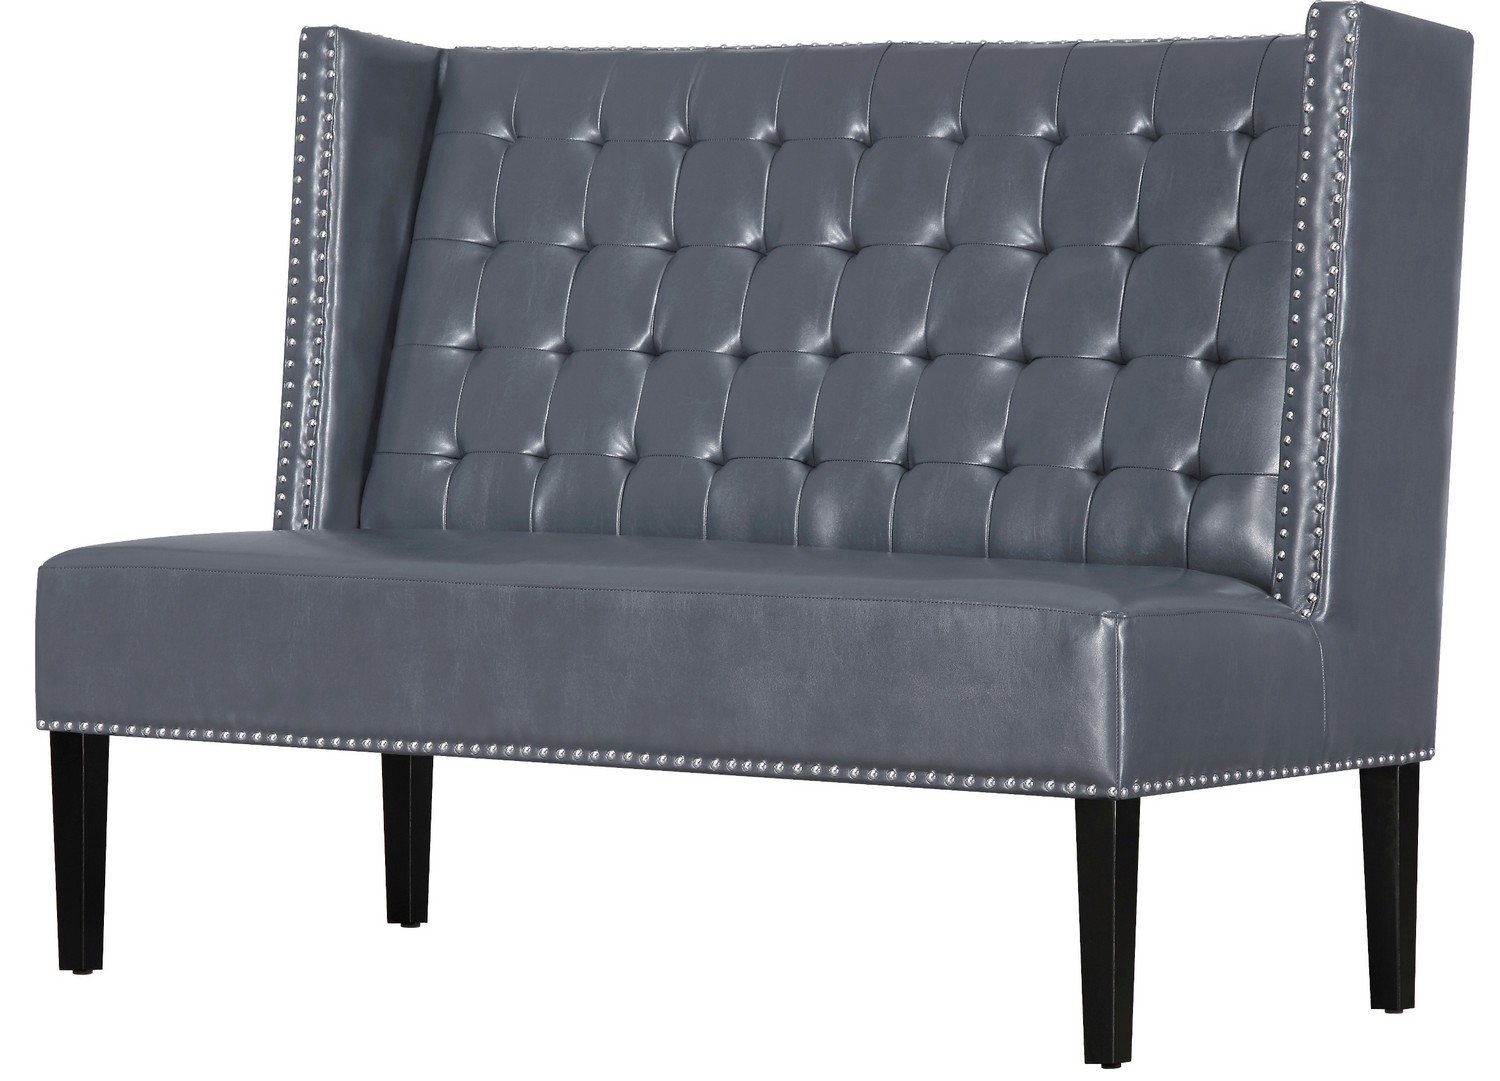 TOV Furniture Halifax Grey Leather Banquette Bench